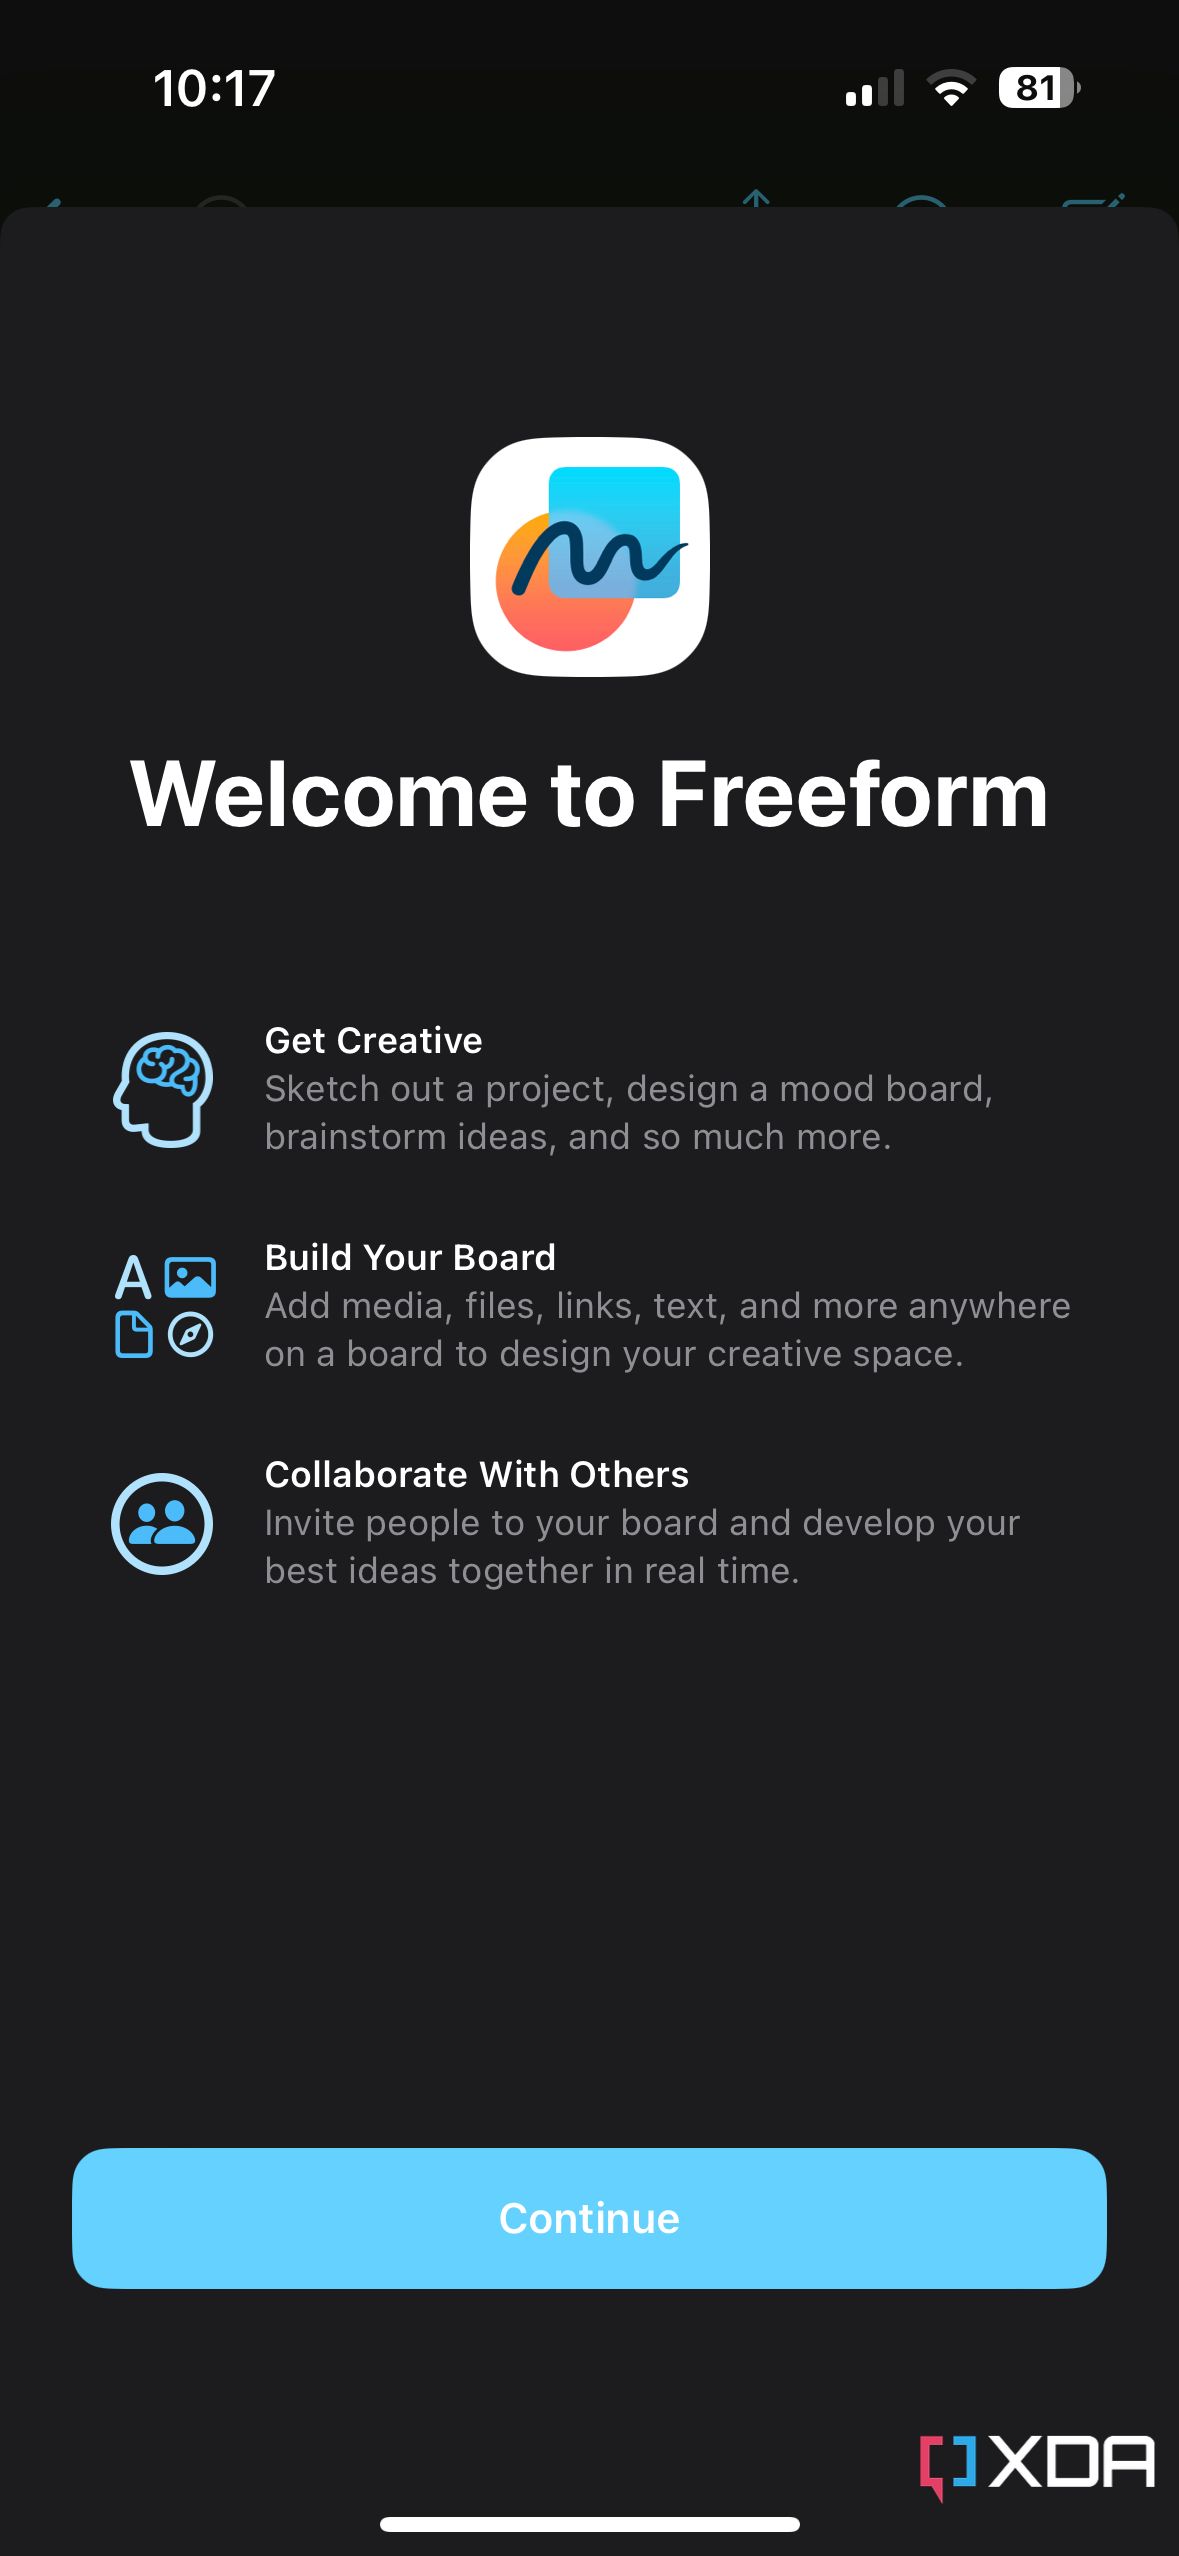 Apple Freeform app on iOS, iPadOS, and macOS A complete guide